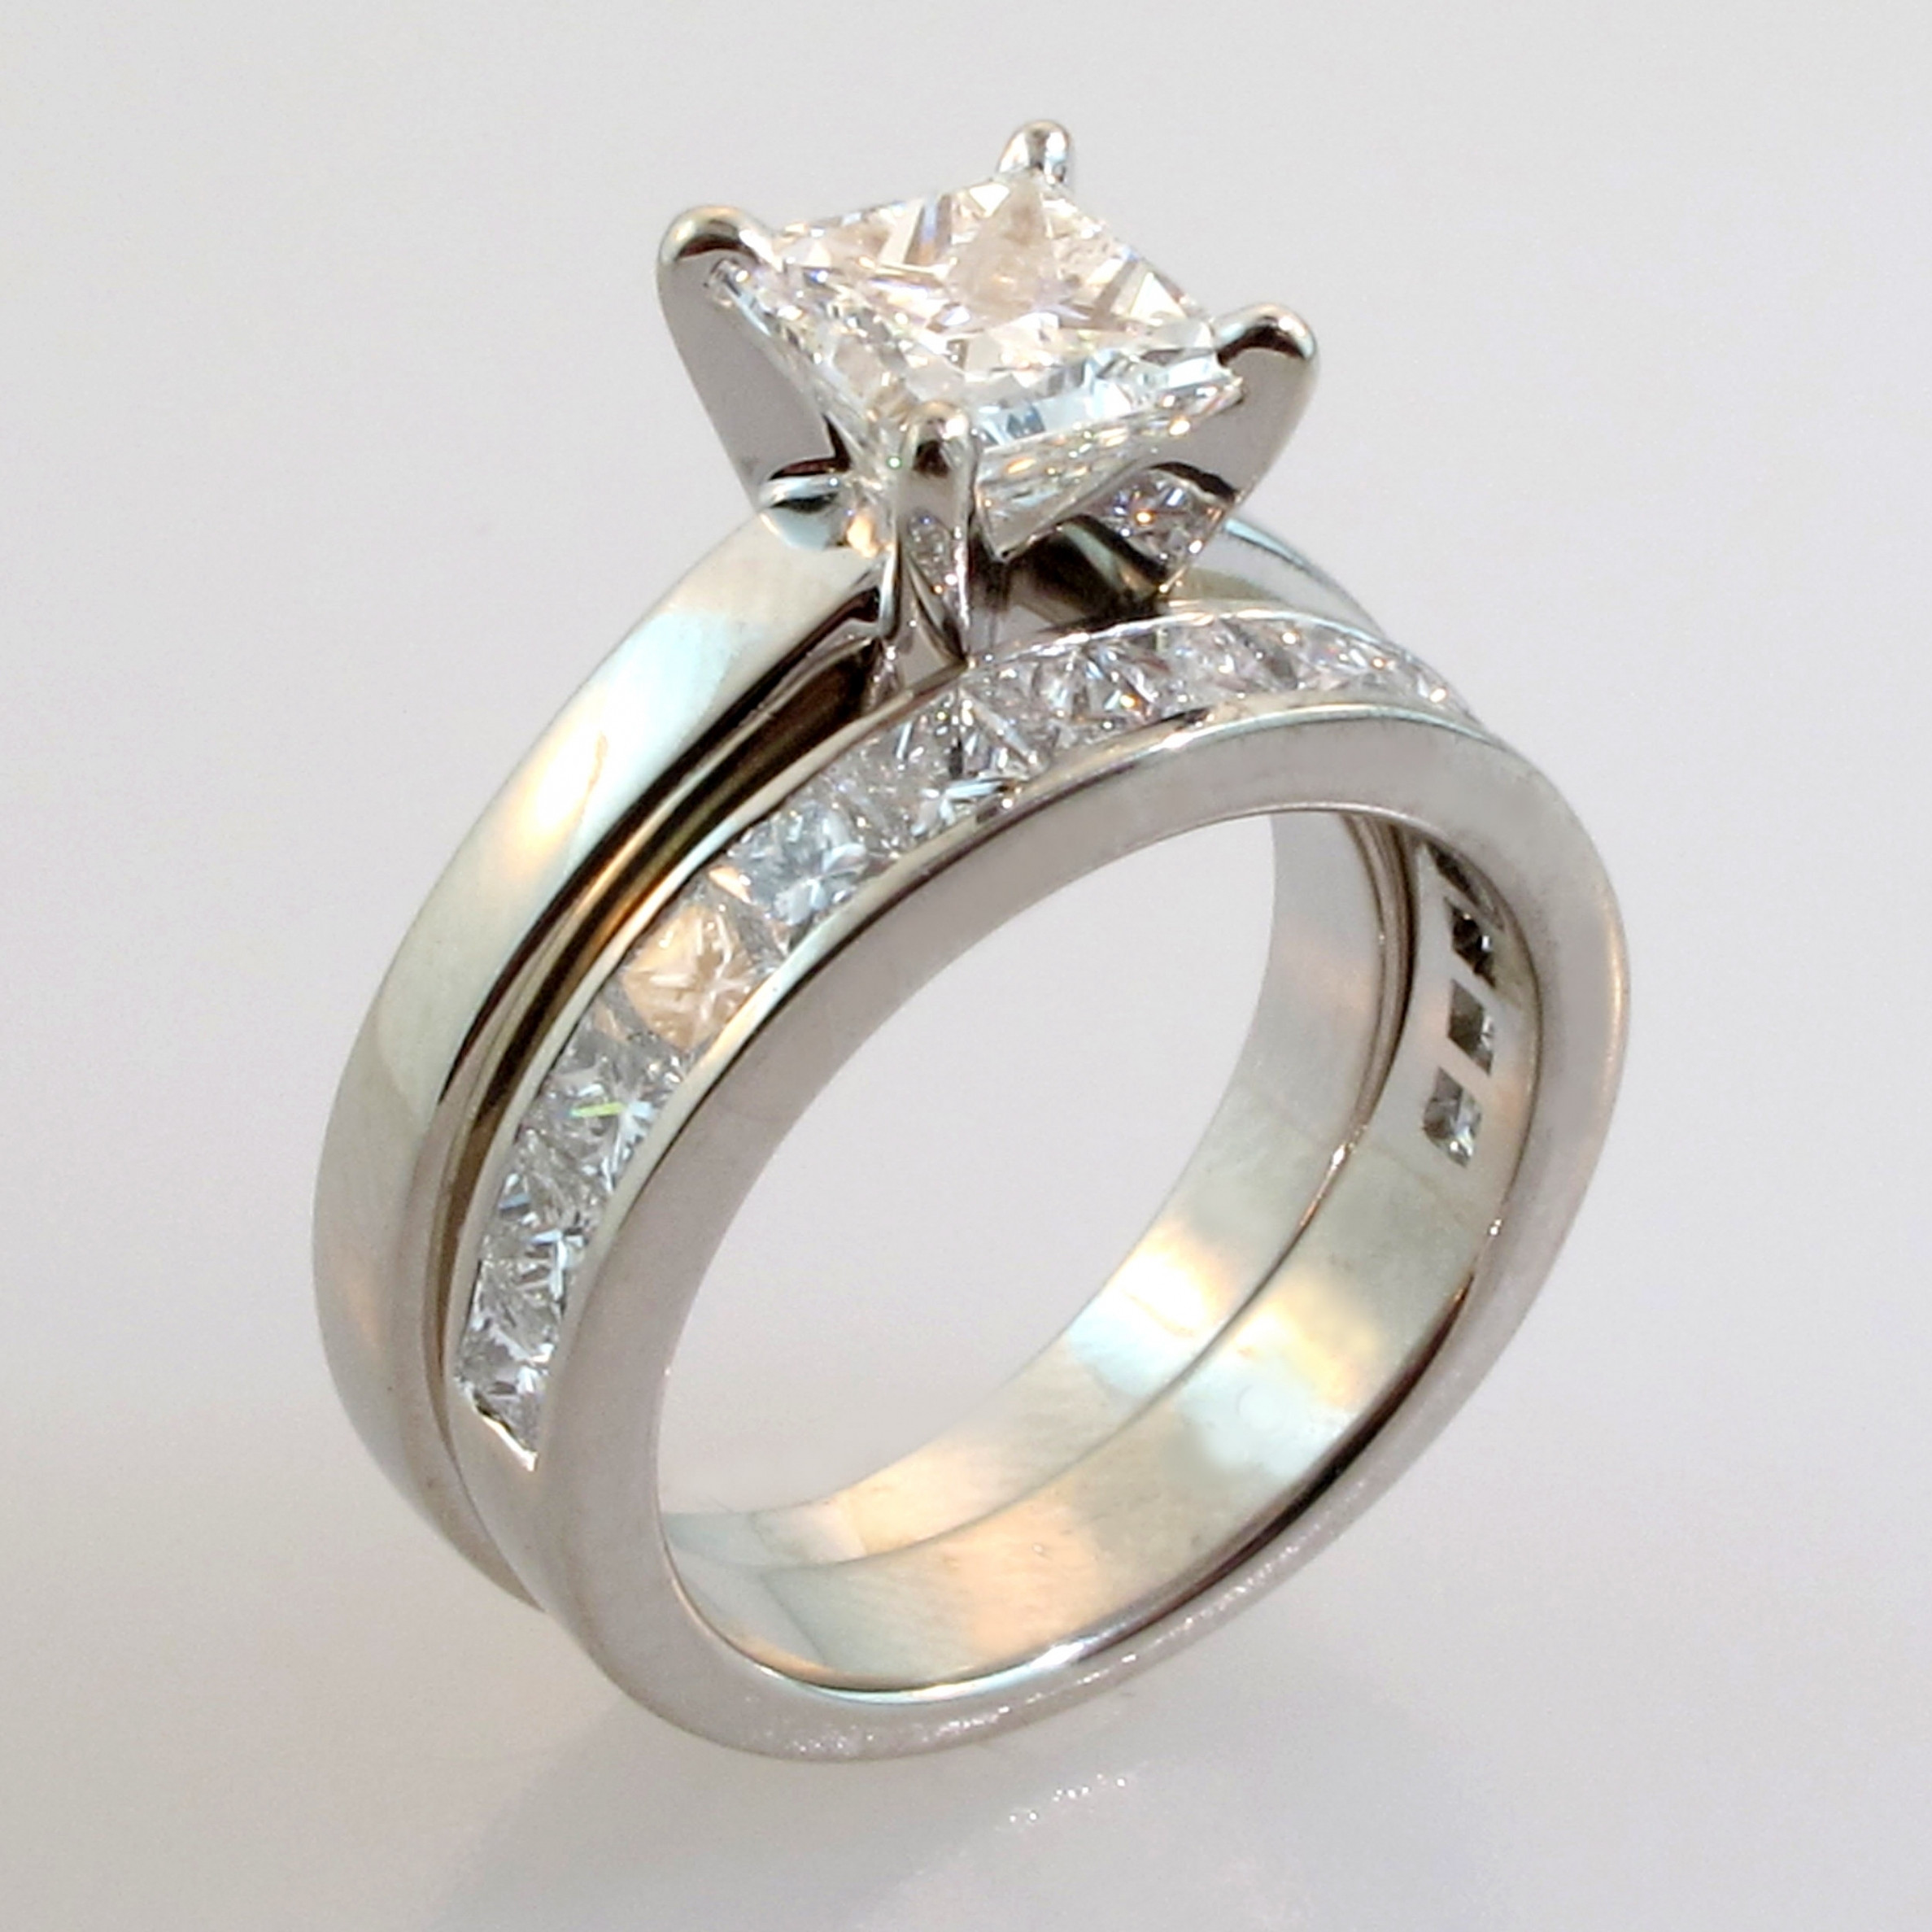 Jcpenney Jewelry Wedding Rings
 View Full Gallery of Gallery jcpenney jewelry wedding